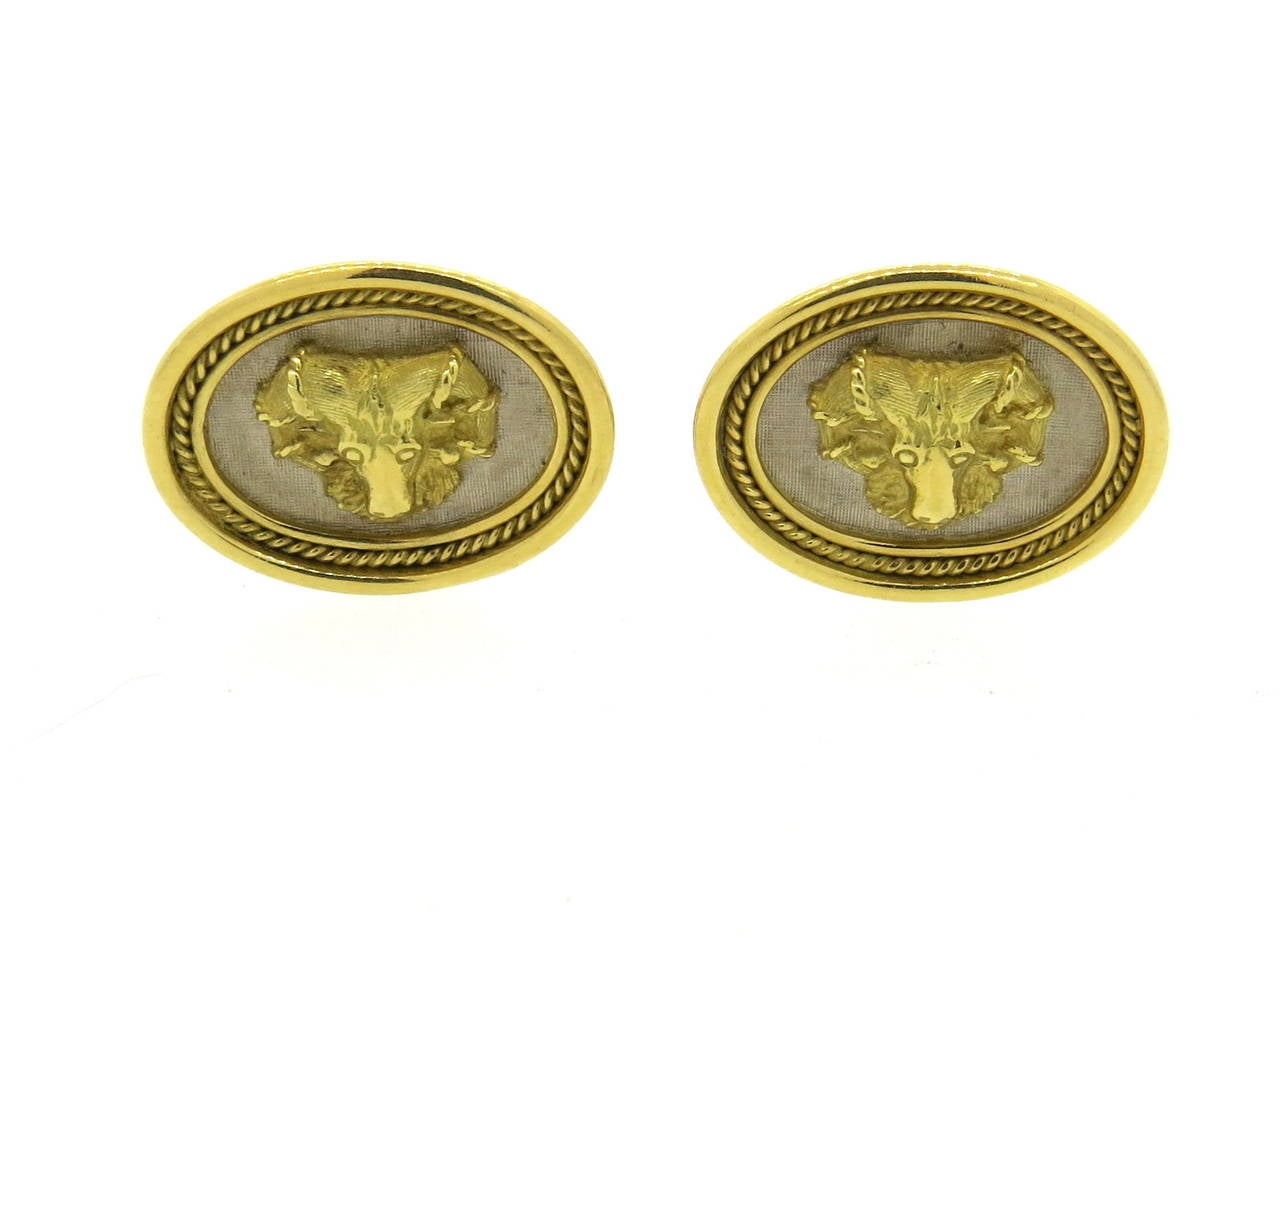 An 18k yellow and white gold pair of cufflinks featuring Ram's heads.  Crafted by famed British designer Elizabeth Gage, the cufflinks measure 24mm x 19mm and weigh 27 grams.